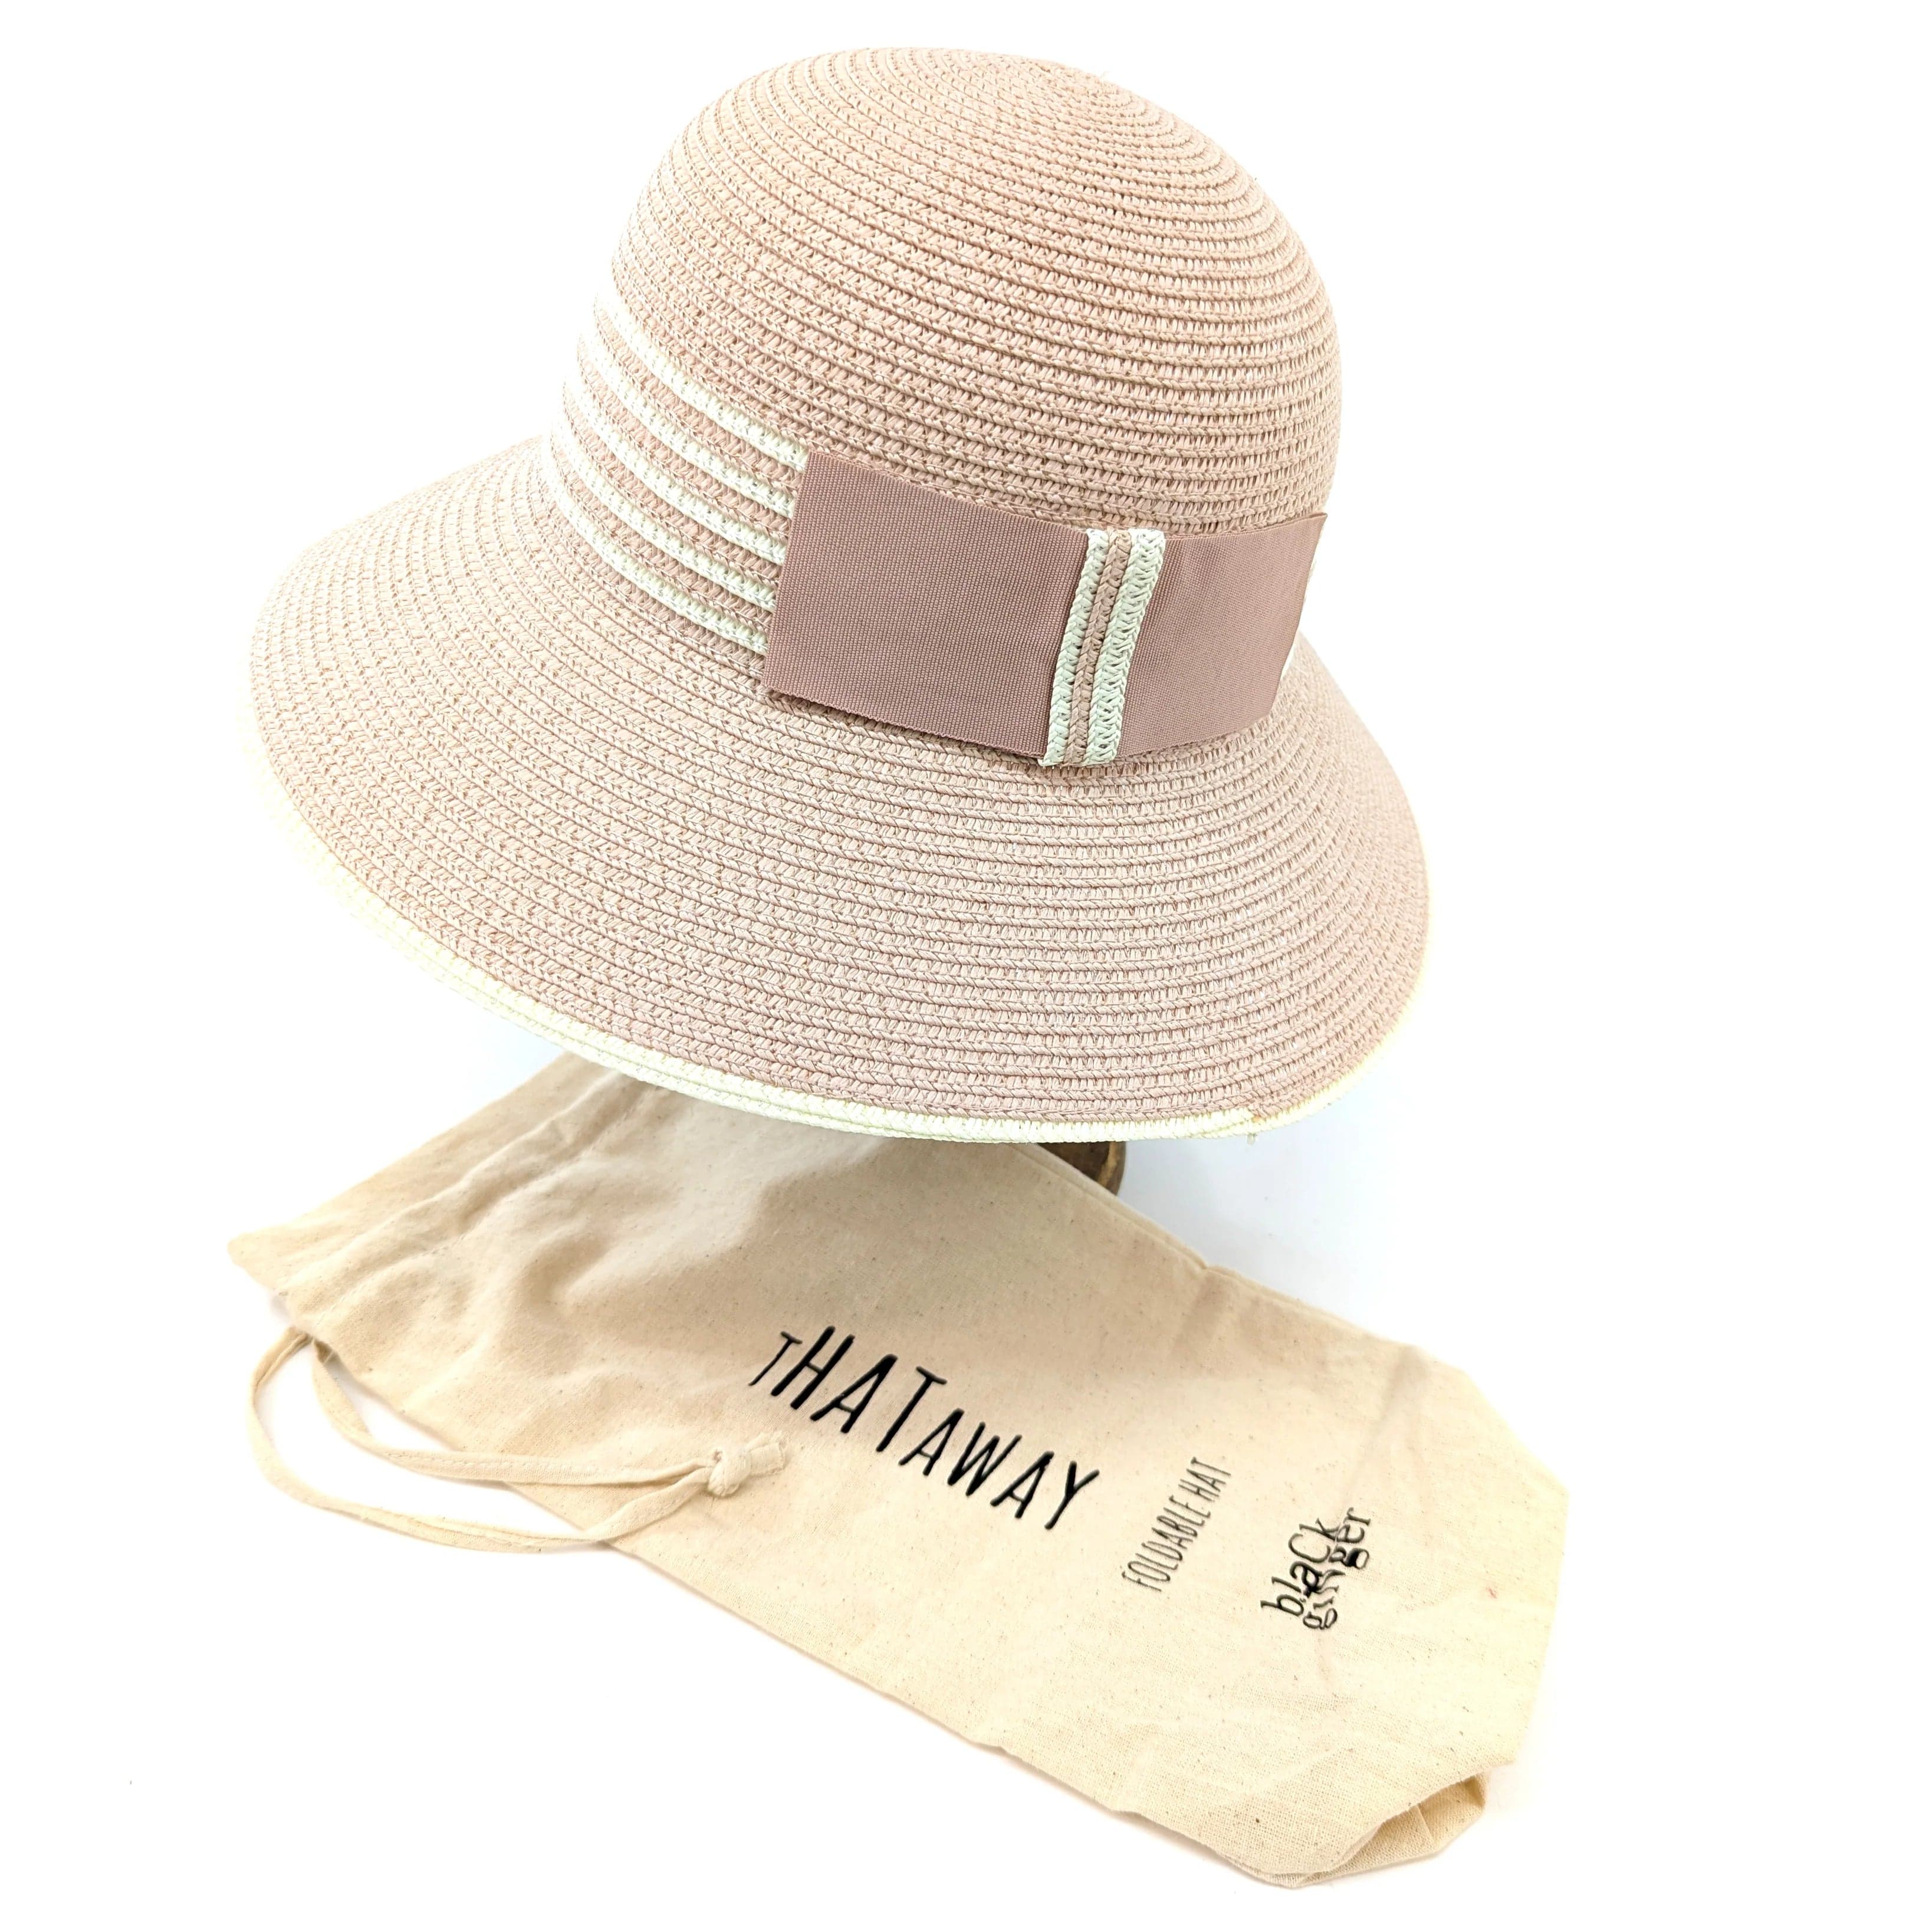 lusciousscarves Ladies Cloche Style Folding Sun Hat Pale Natural with a Stripey Band,